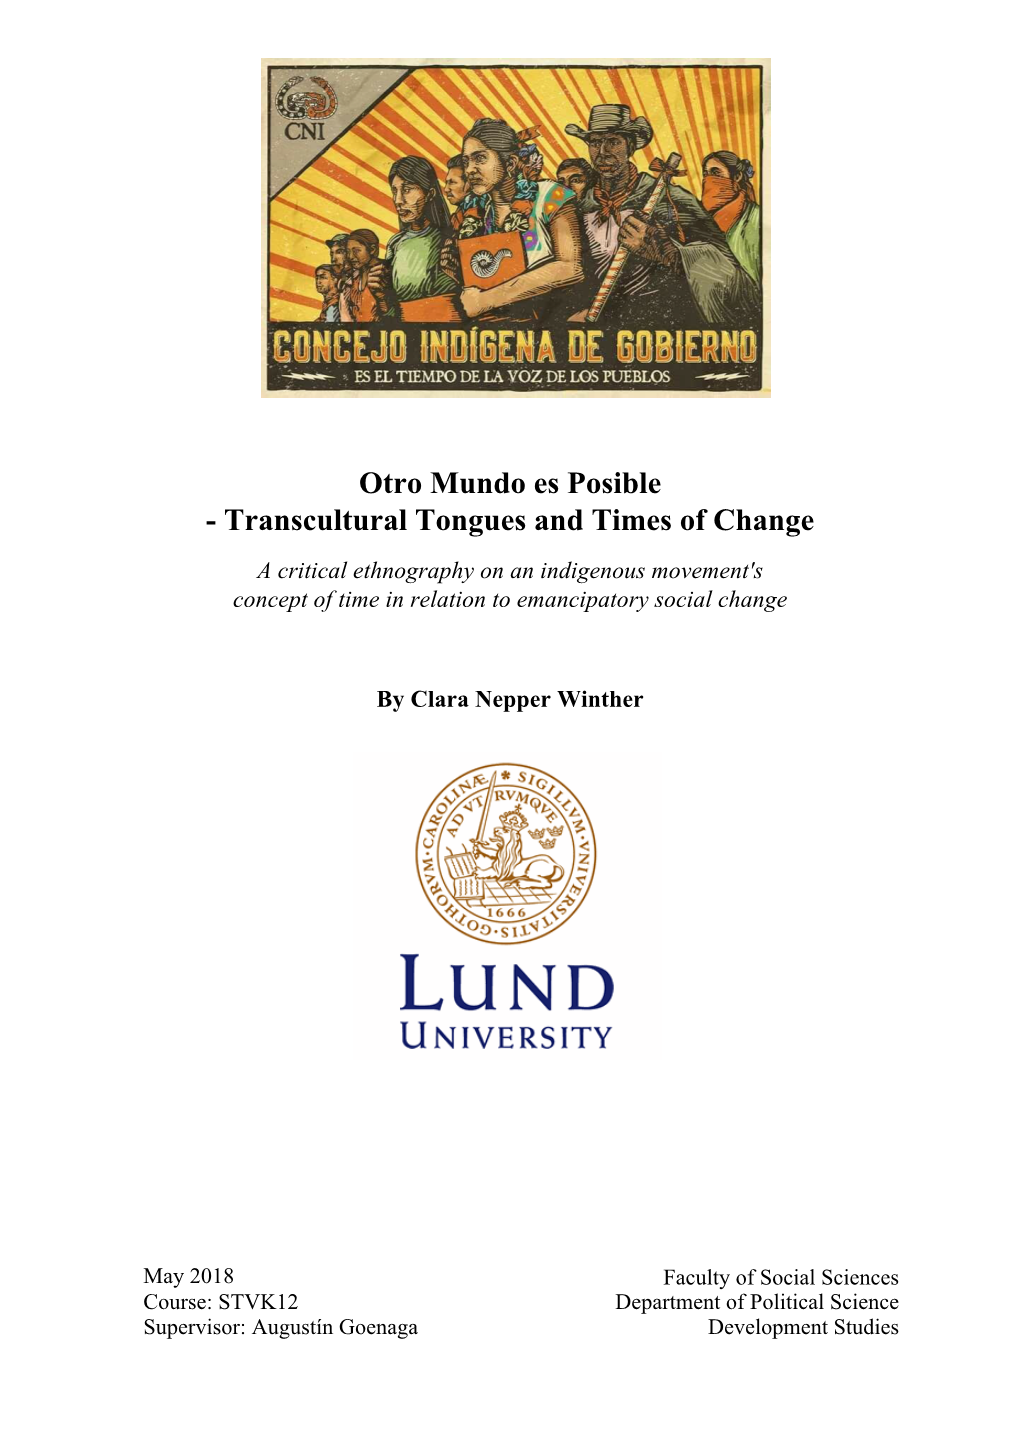 Transcultural Tongues and Times of Change a Critical Ethnography on an Indigenous Movement's Concept of Time in Relation to Emancipatory Social Change